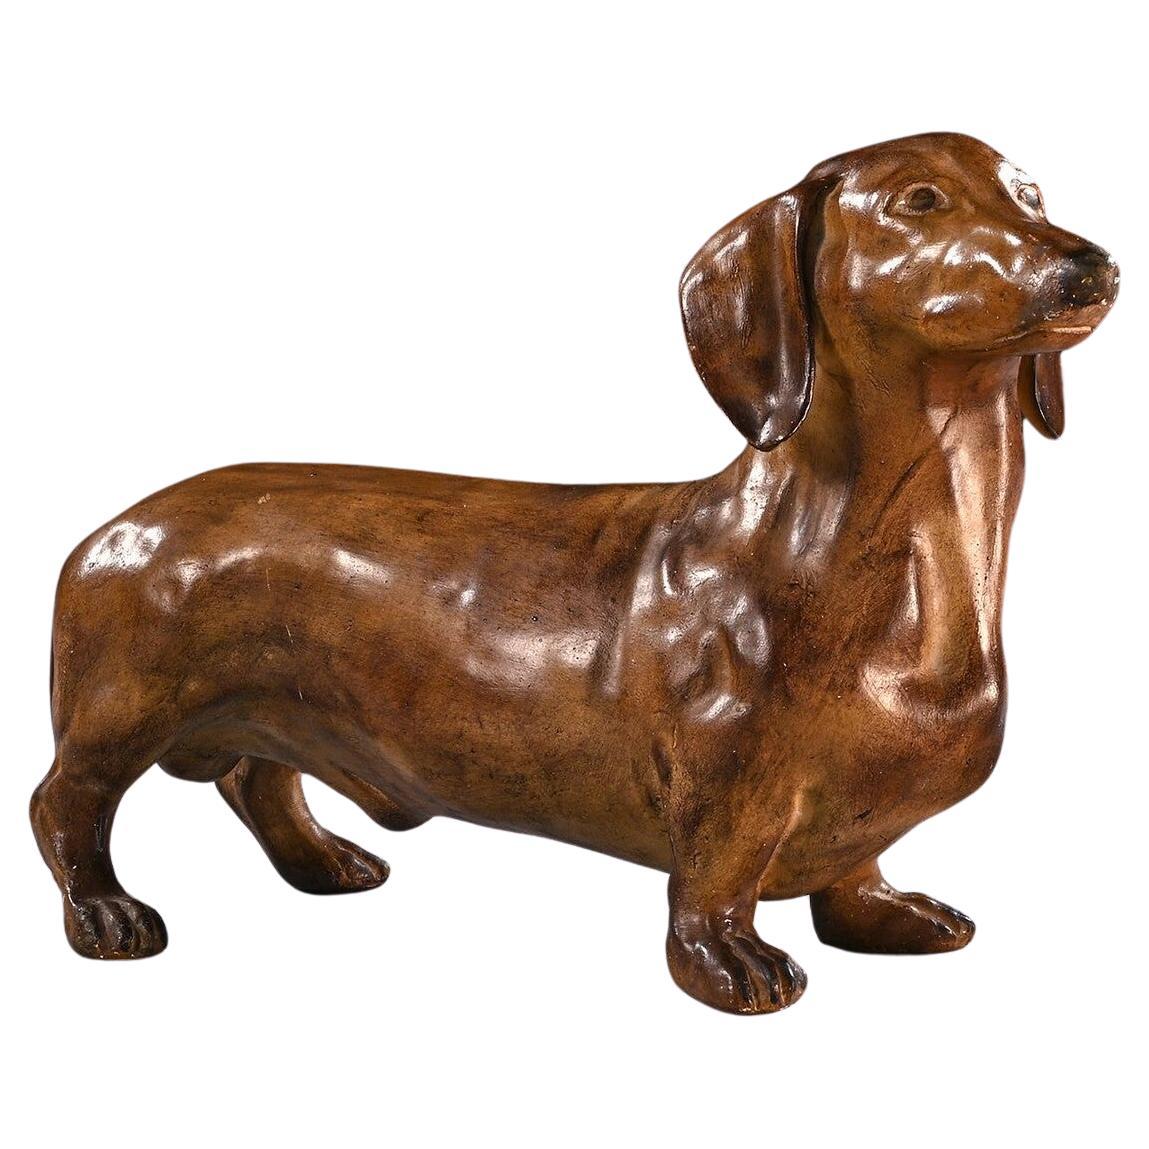 Rare French Life-like Glazed Terracotta Sculpture of a Dachshund Dog